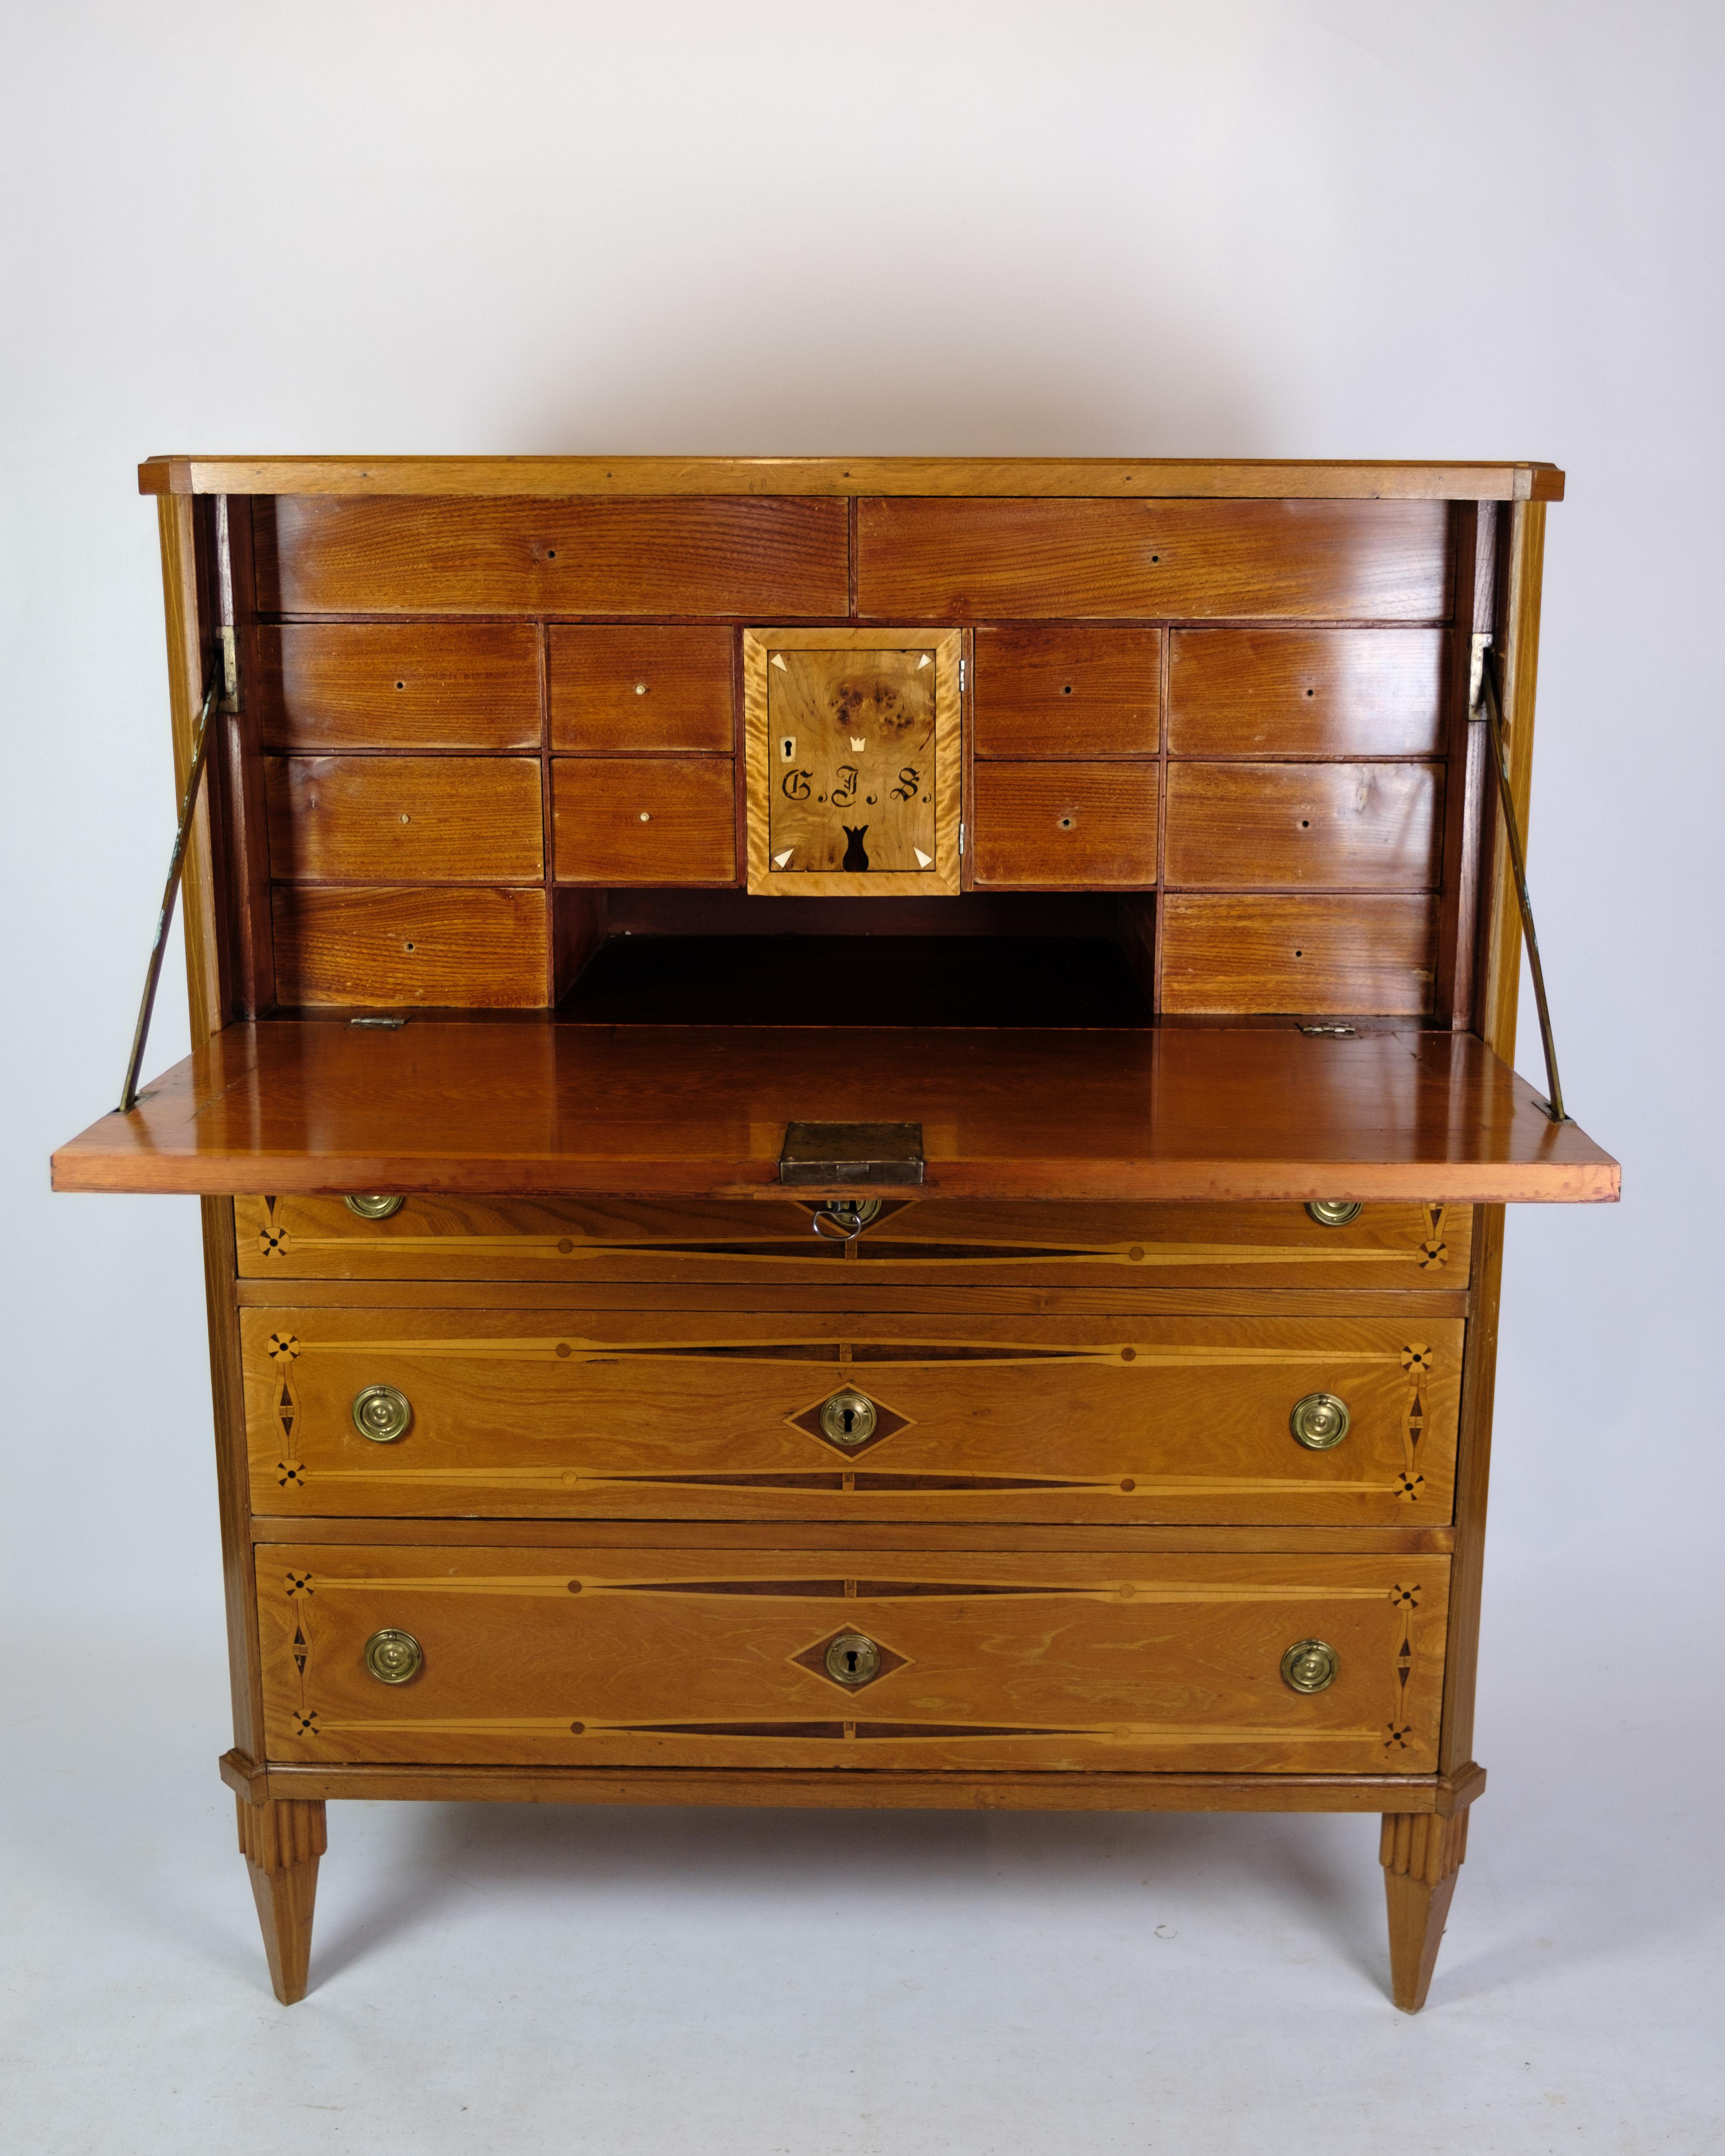 Secretary in Mahogany With Inlaid wood and Brass Handles from the 1790s For Sale 5